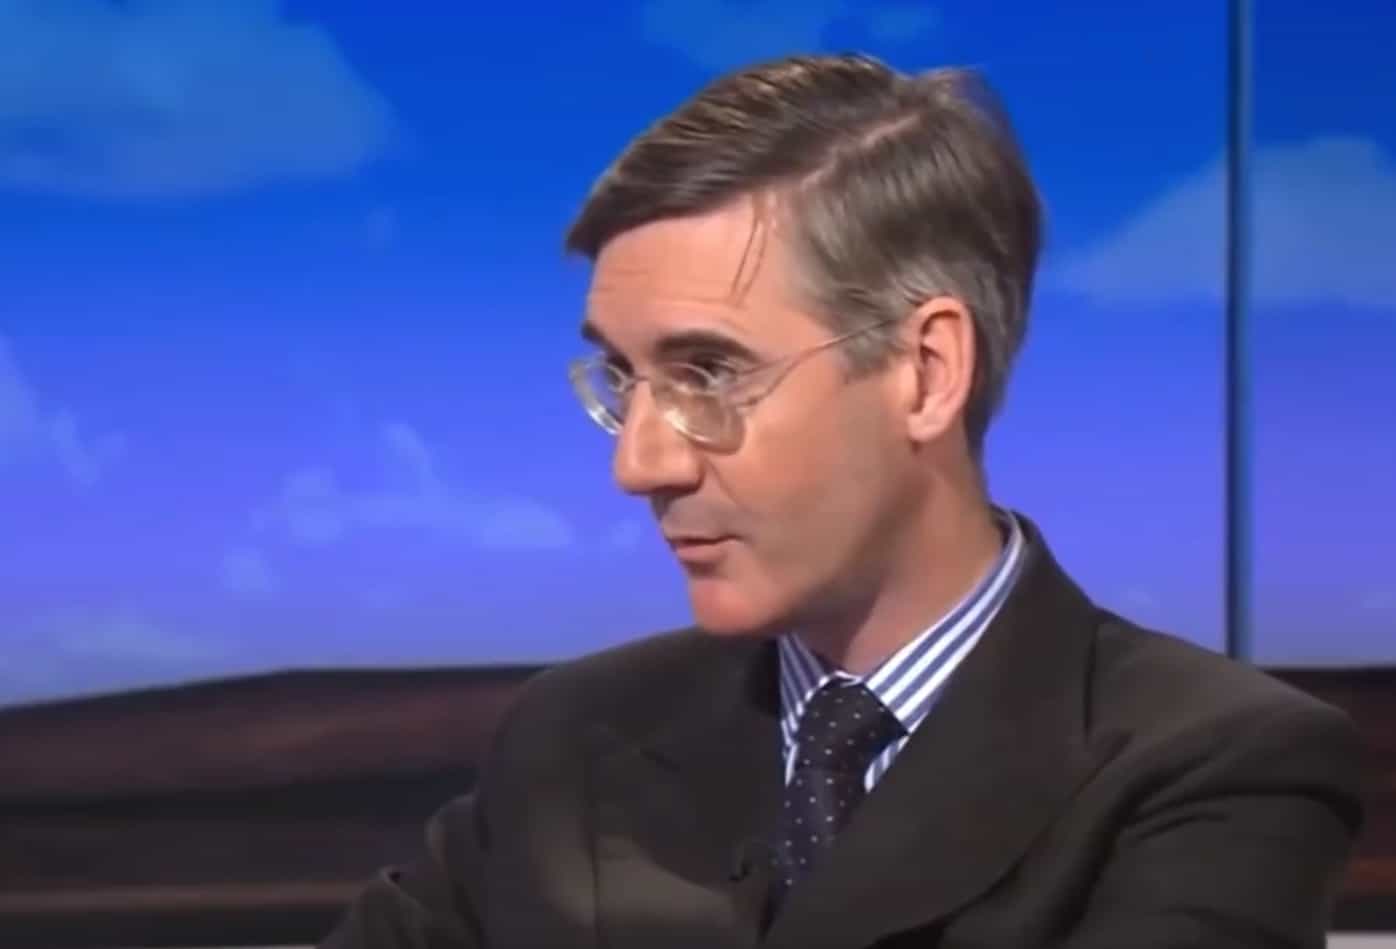 Sun deletes Rees-Mogg’s criticisms of empty desks after it transpires the photo was taken in his own department